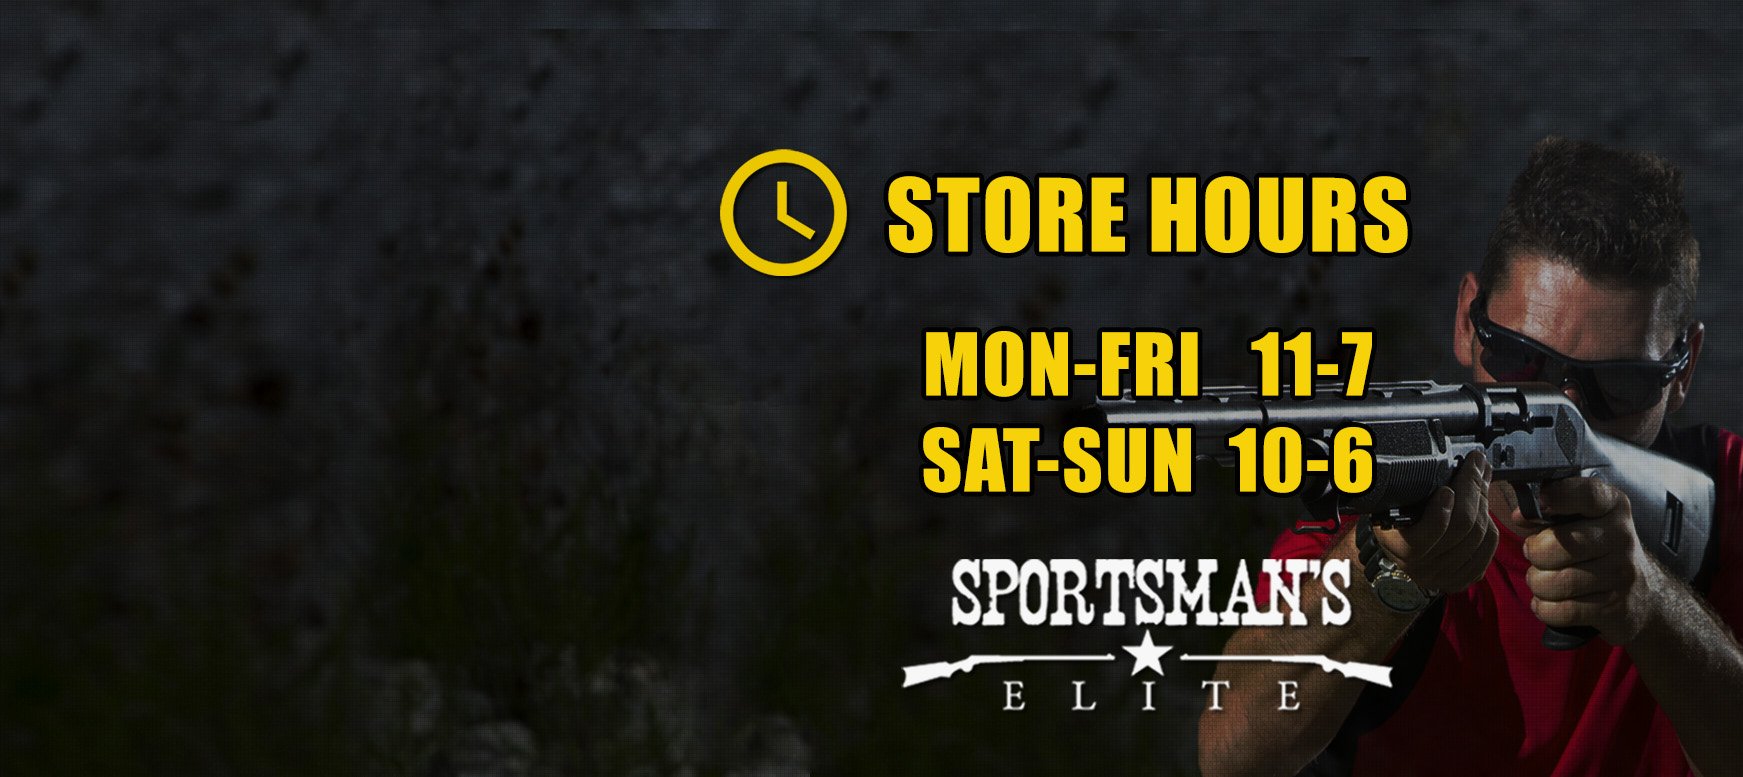 Store-hours